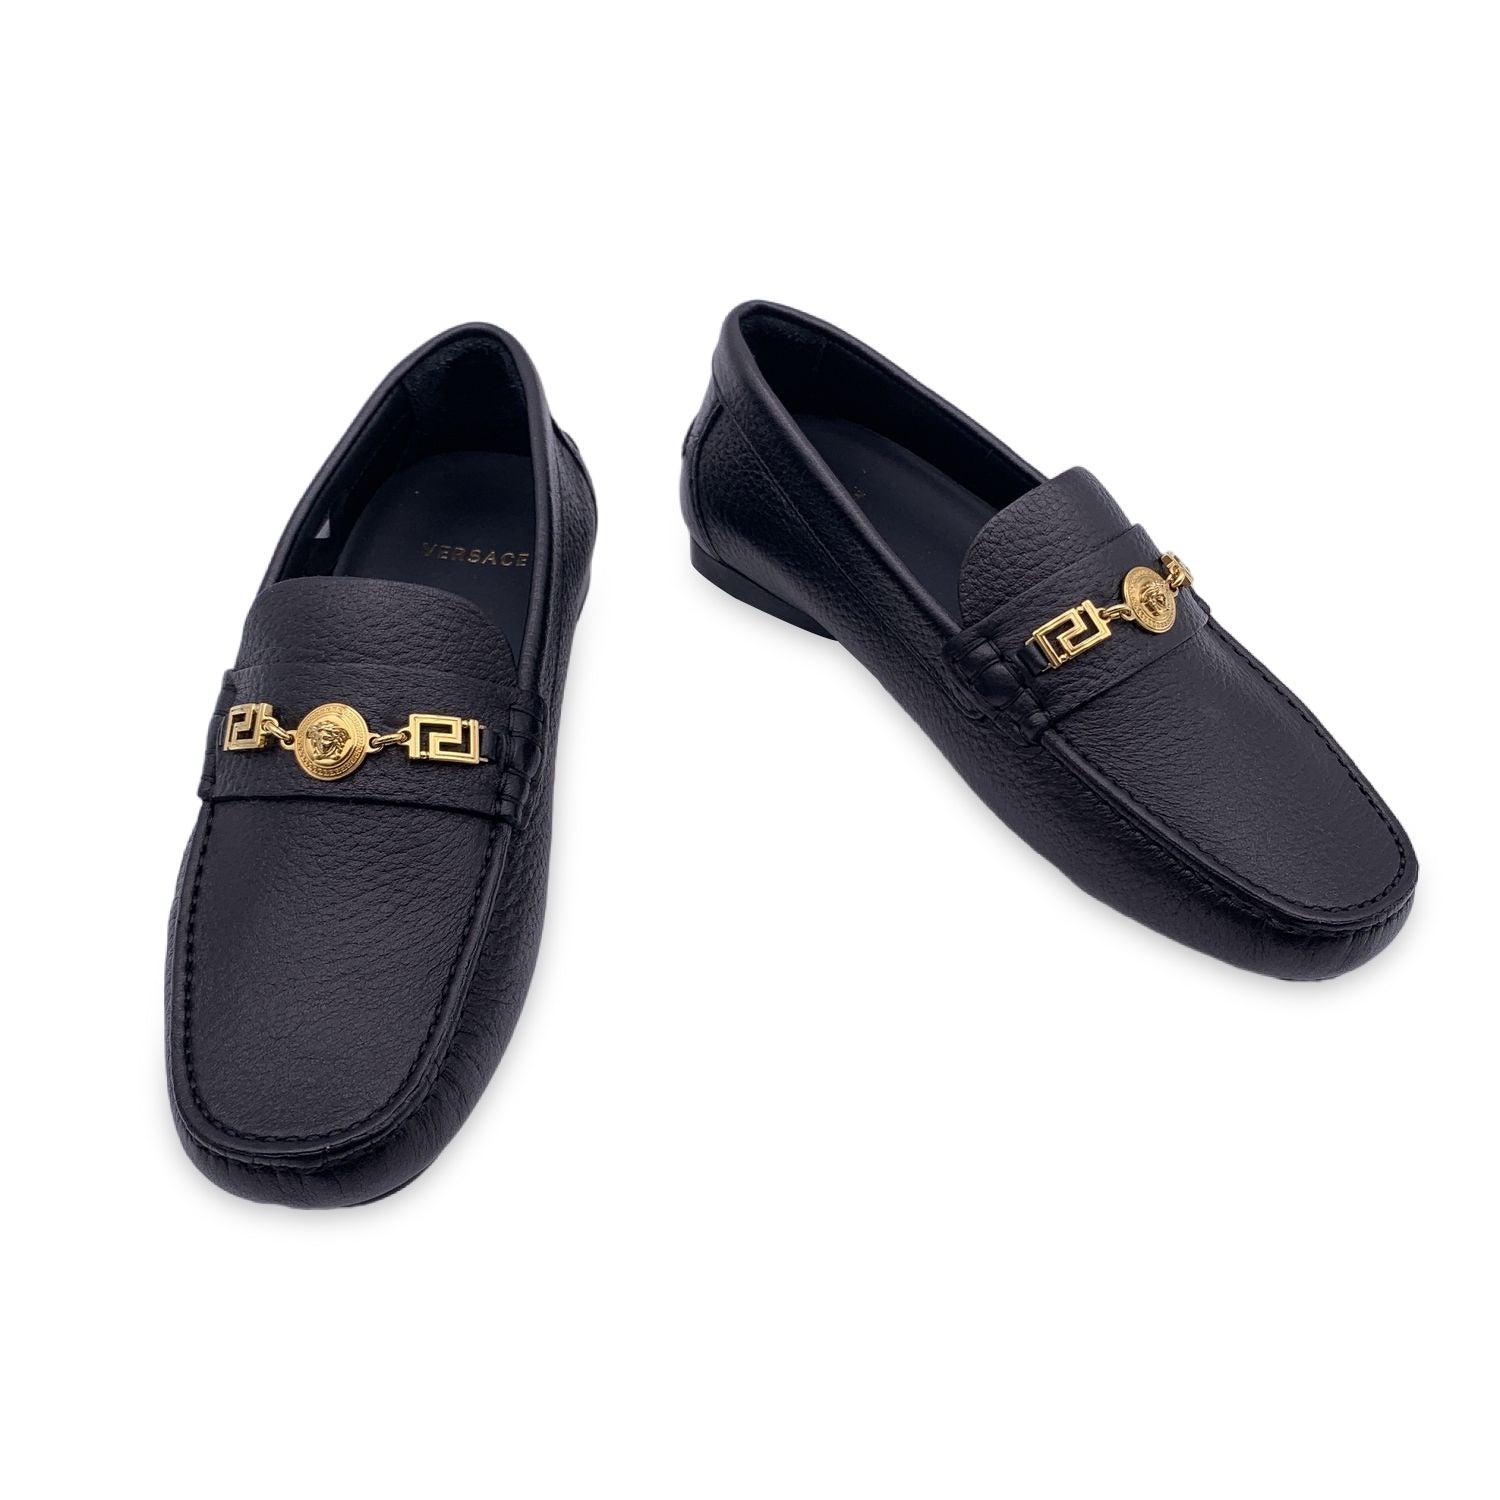 Beautiful Versace black leather Loafers car shoes. Crafted in black leather with gold-tone Medusa and greek detailing. They feature a rounded toe and slip-on design. Rubber sole. Made in Italy. Size: EU 38 (The size shown for this item is the size